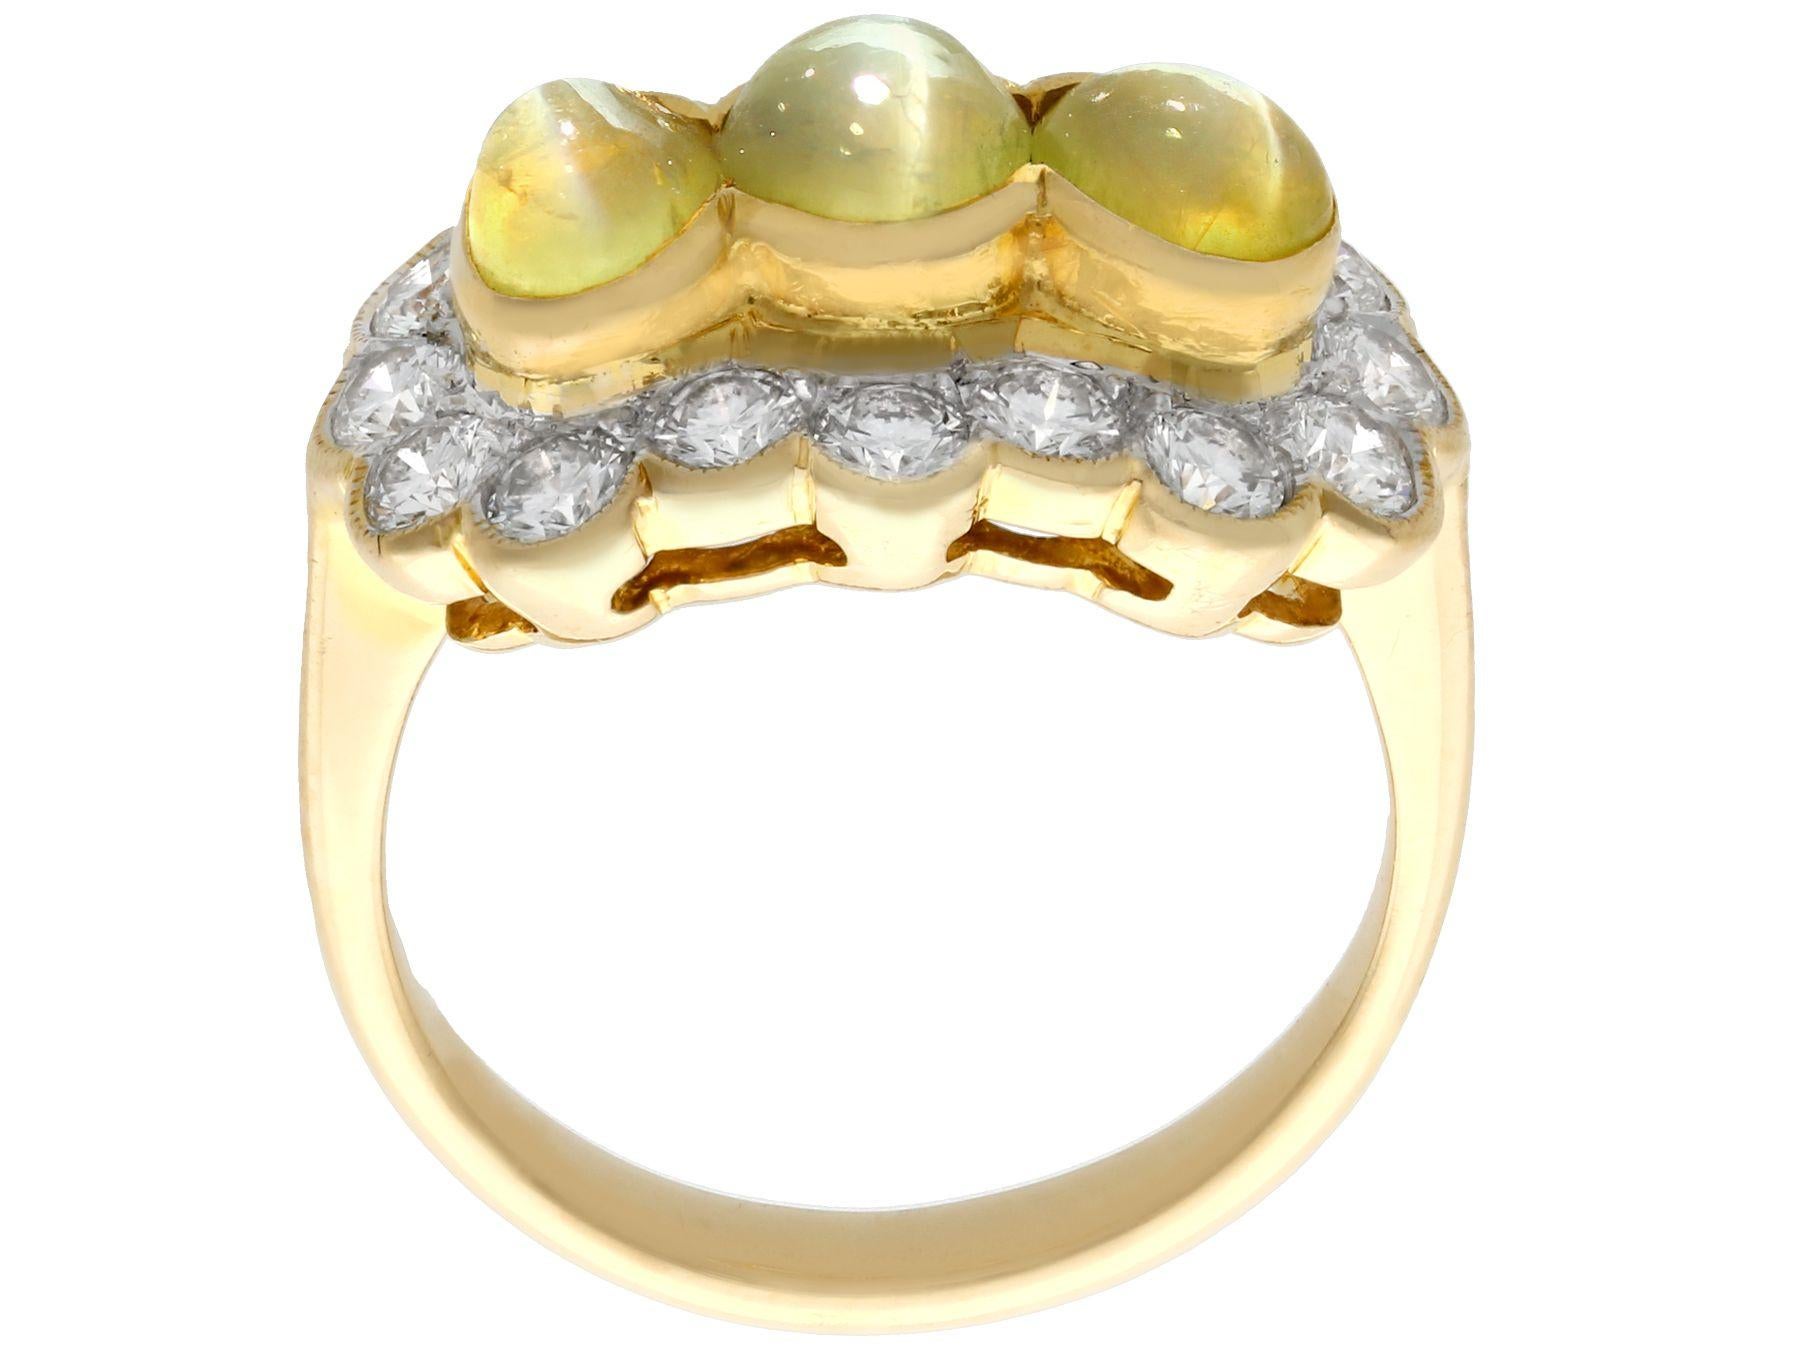 Women's Vintage 1970s 2.19Ct Cabochon Cut Chrysoberyl and Diamond Gold Cocktail Ring For Sale